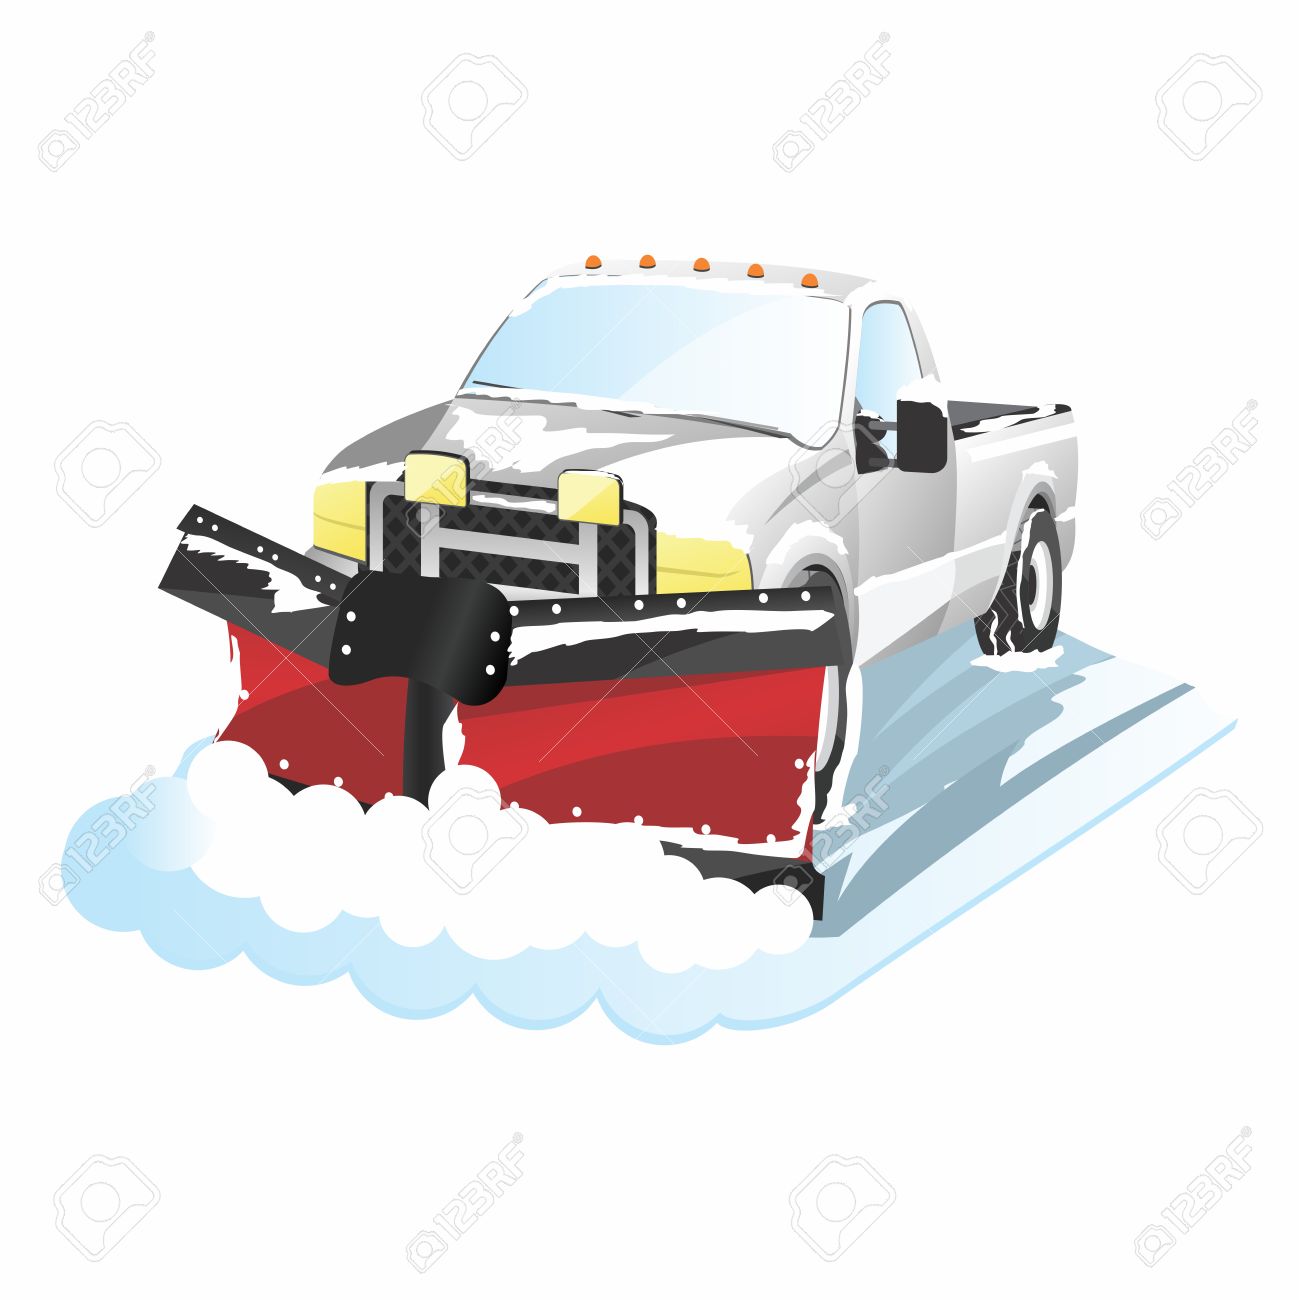 snow removal clipart - photo #24